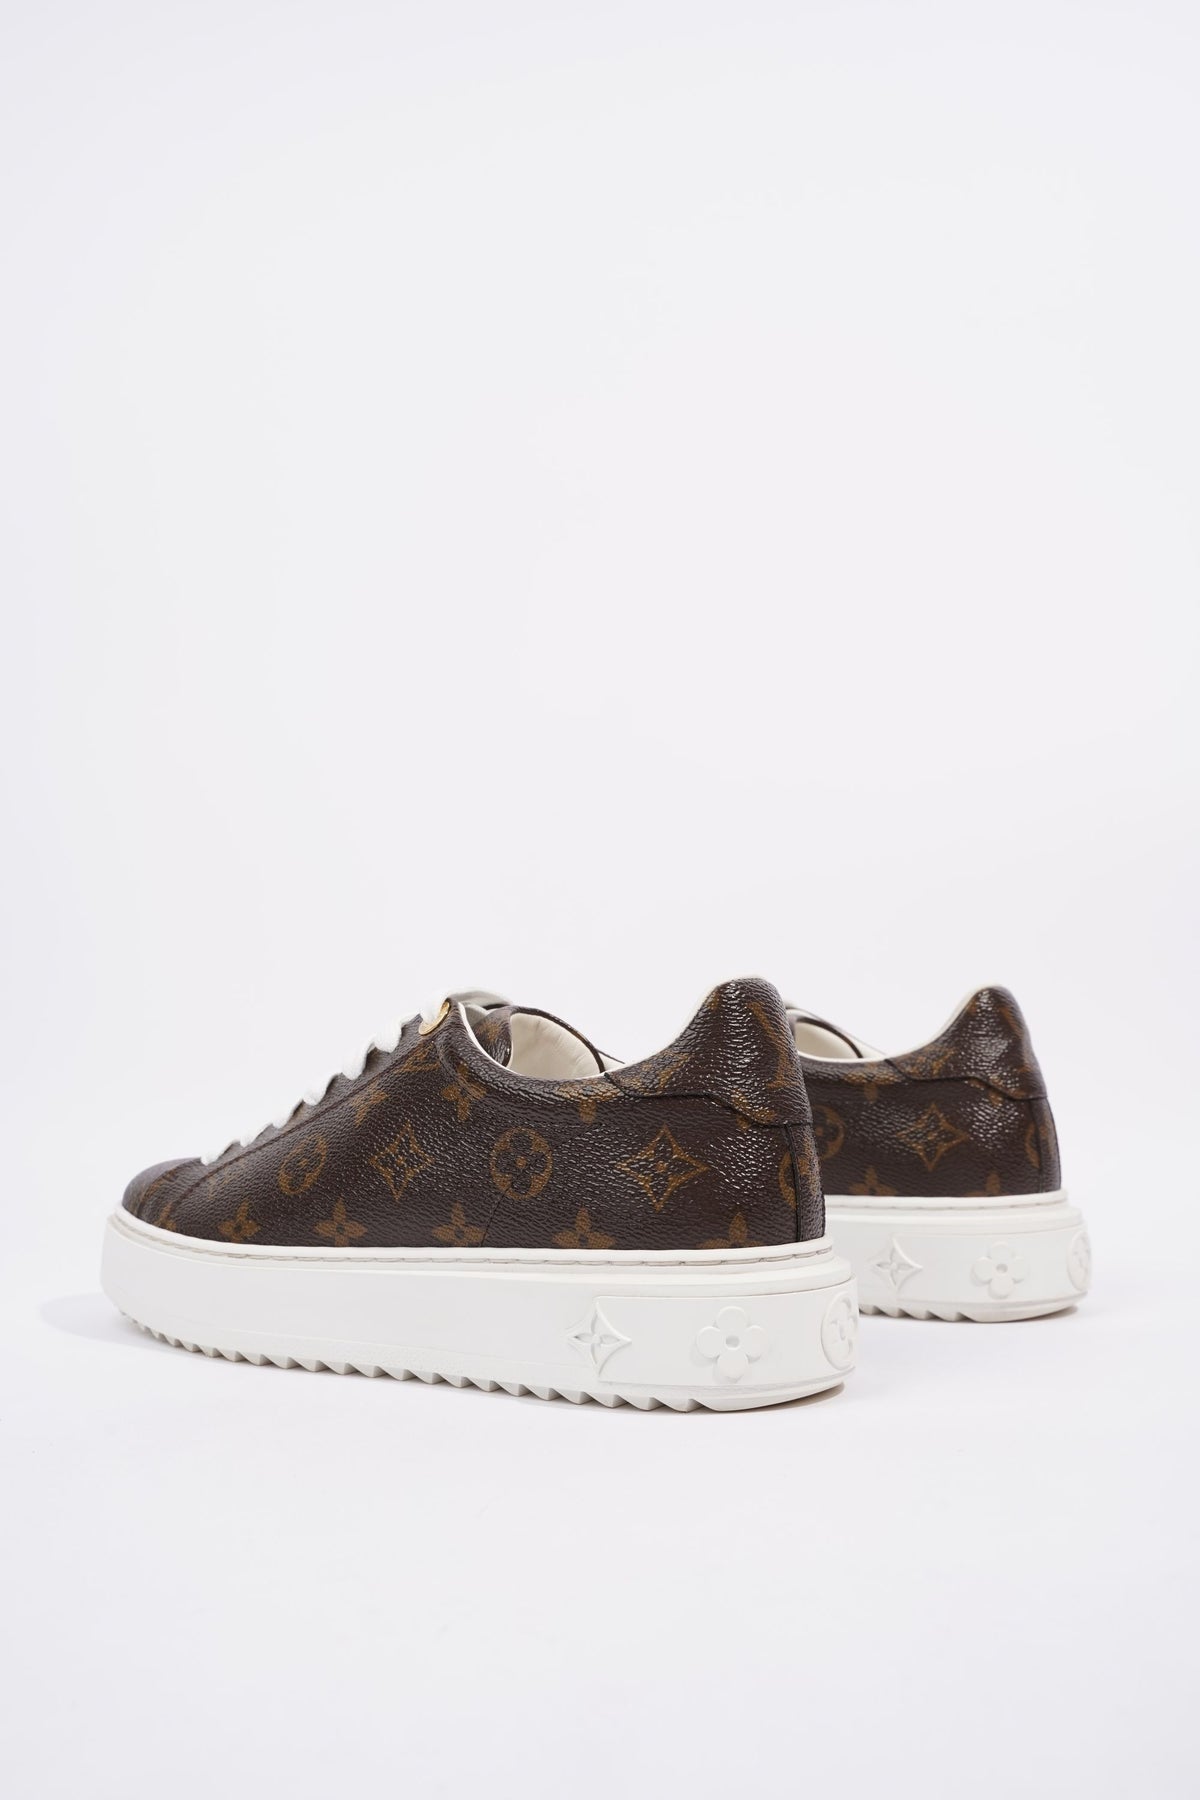 Just in! LV Time Out sneaker size 39 with box and dust bags. In